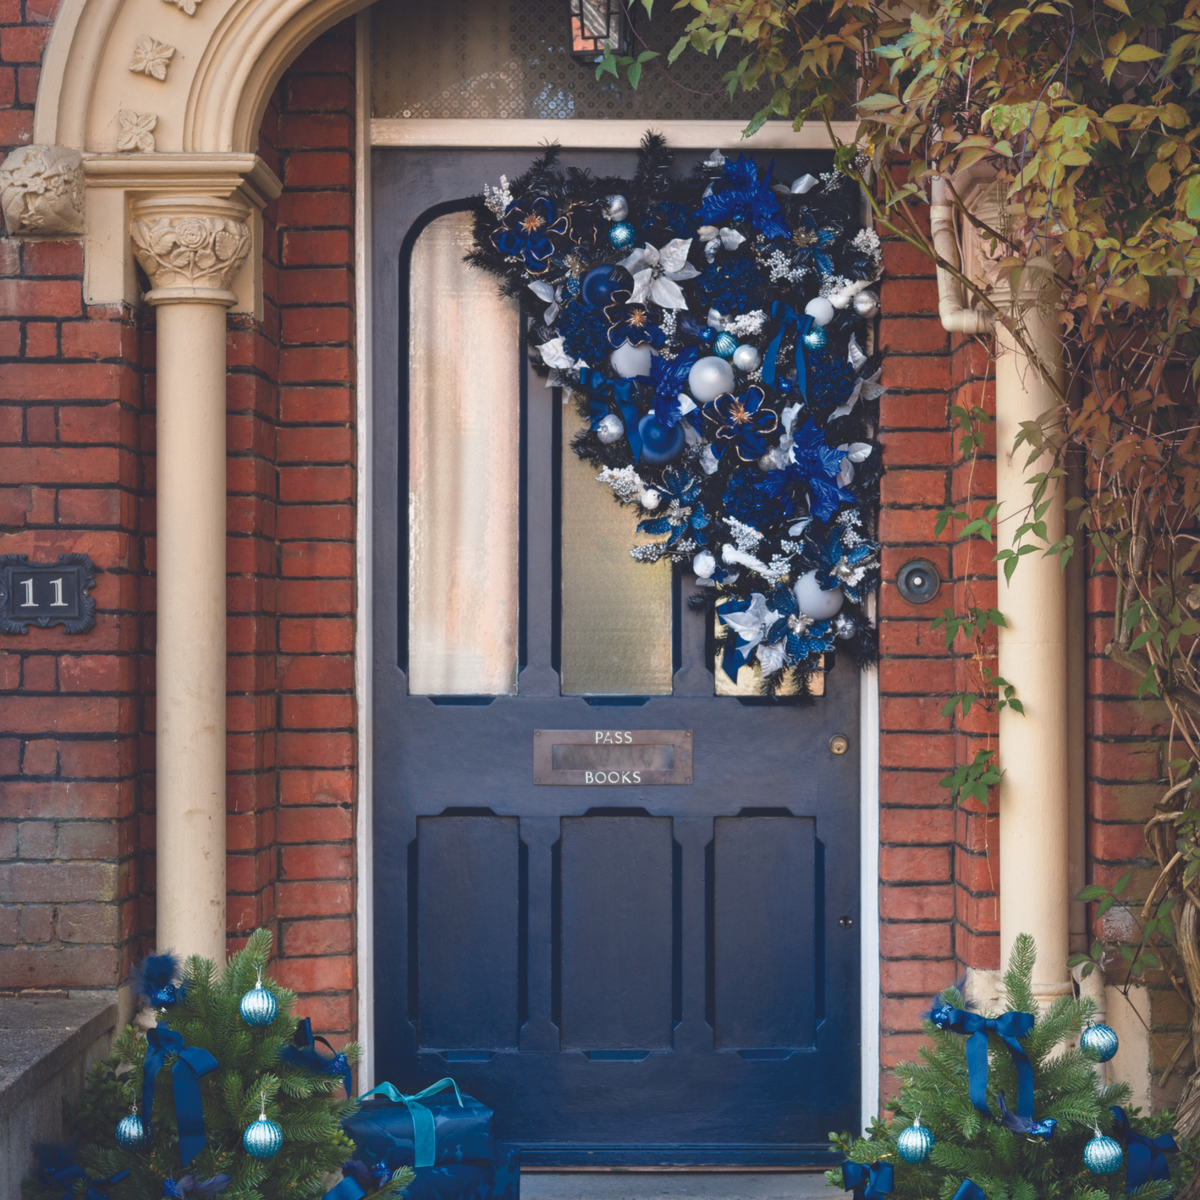 How to decorate a front door for Christmas - a step-by-step guide